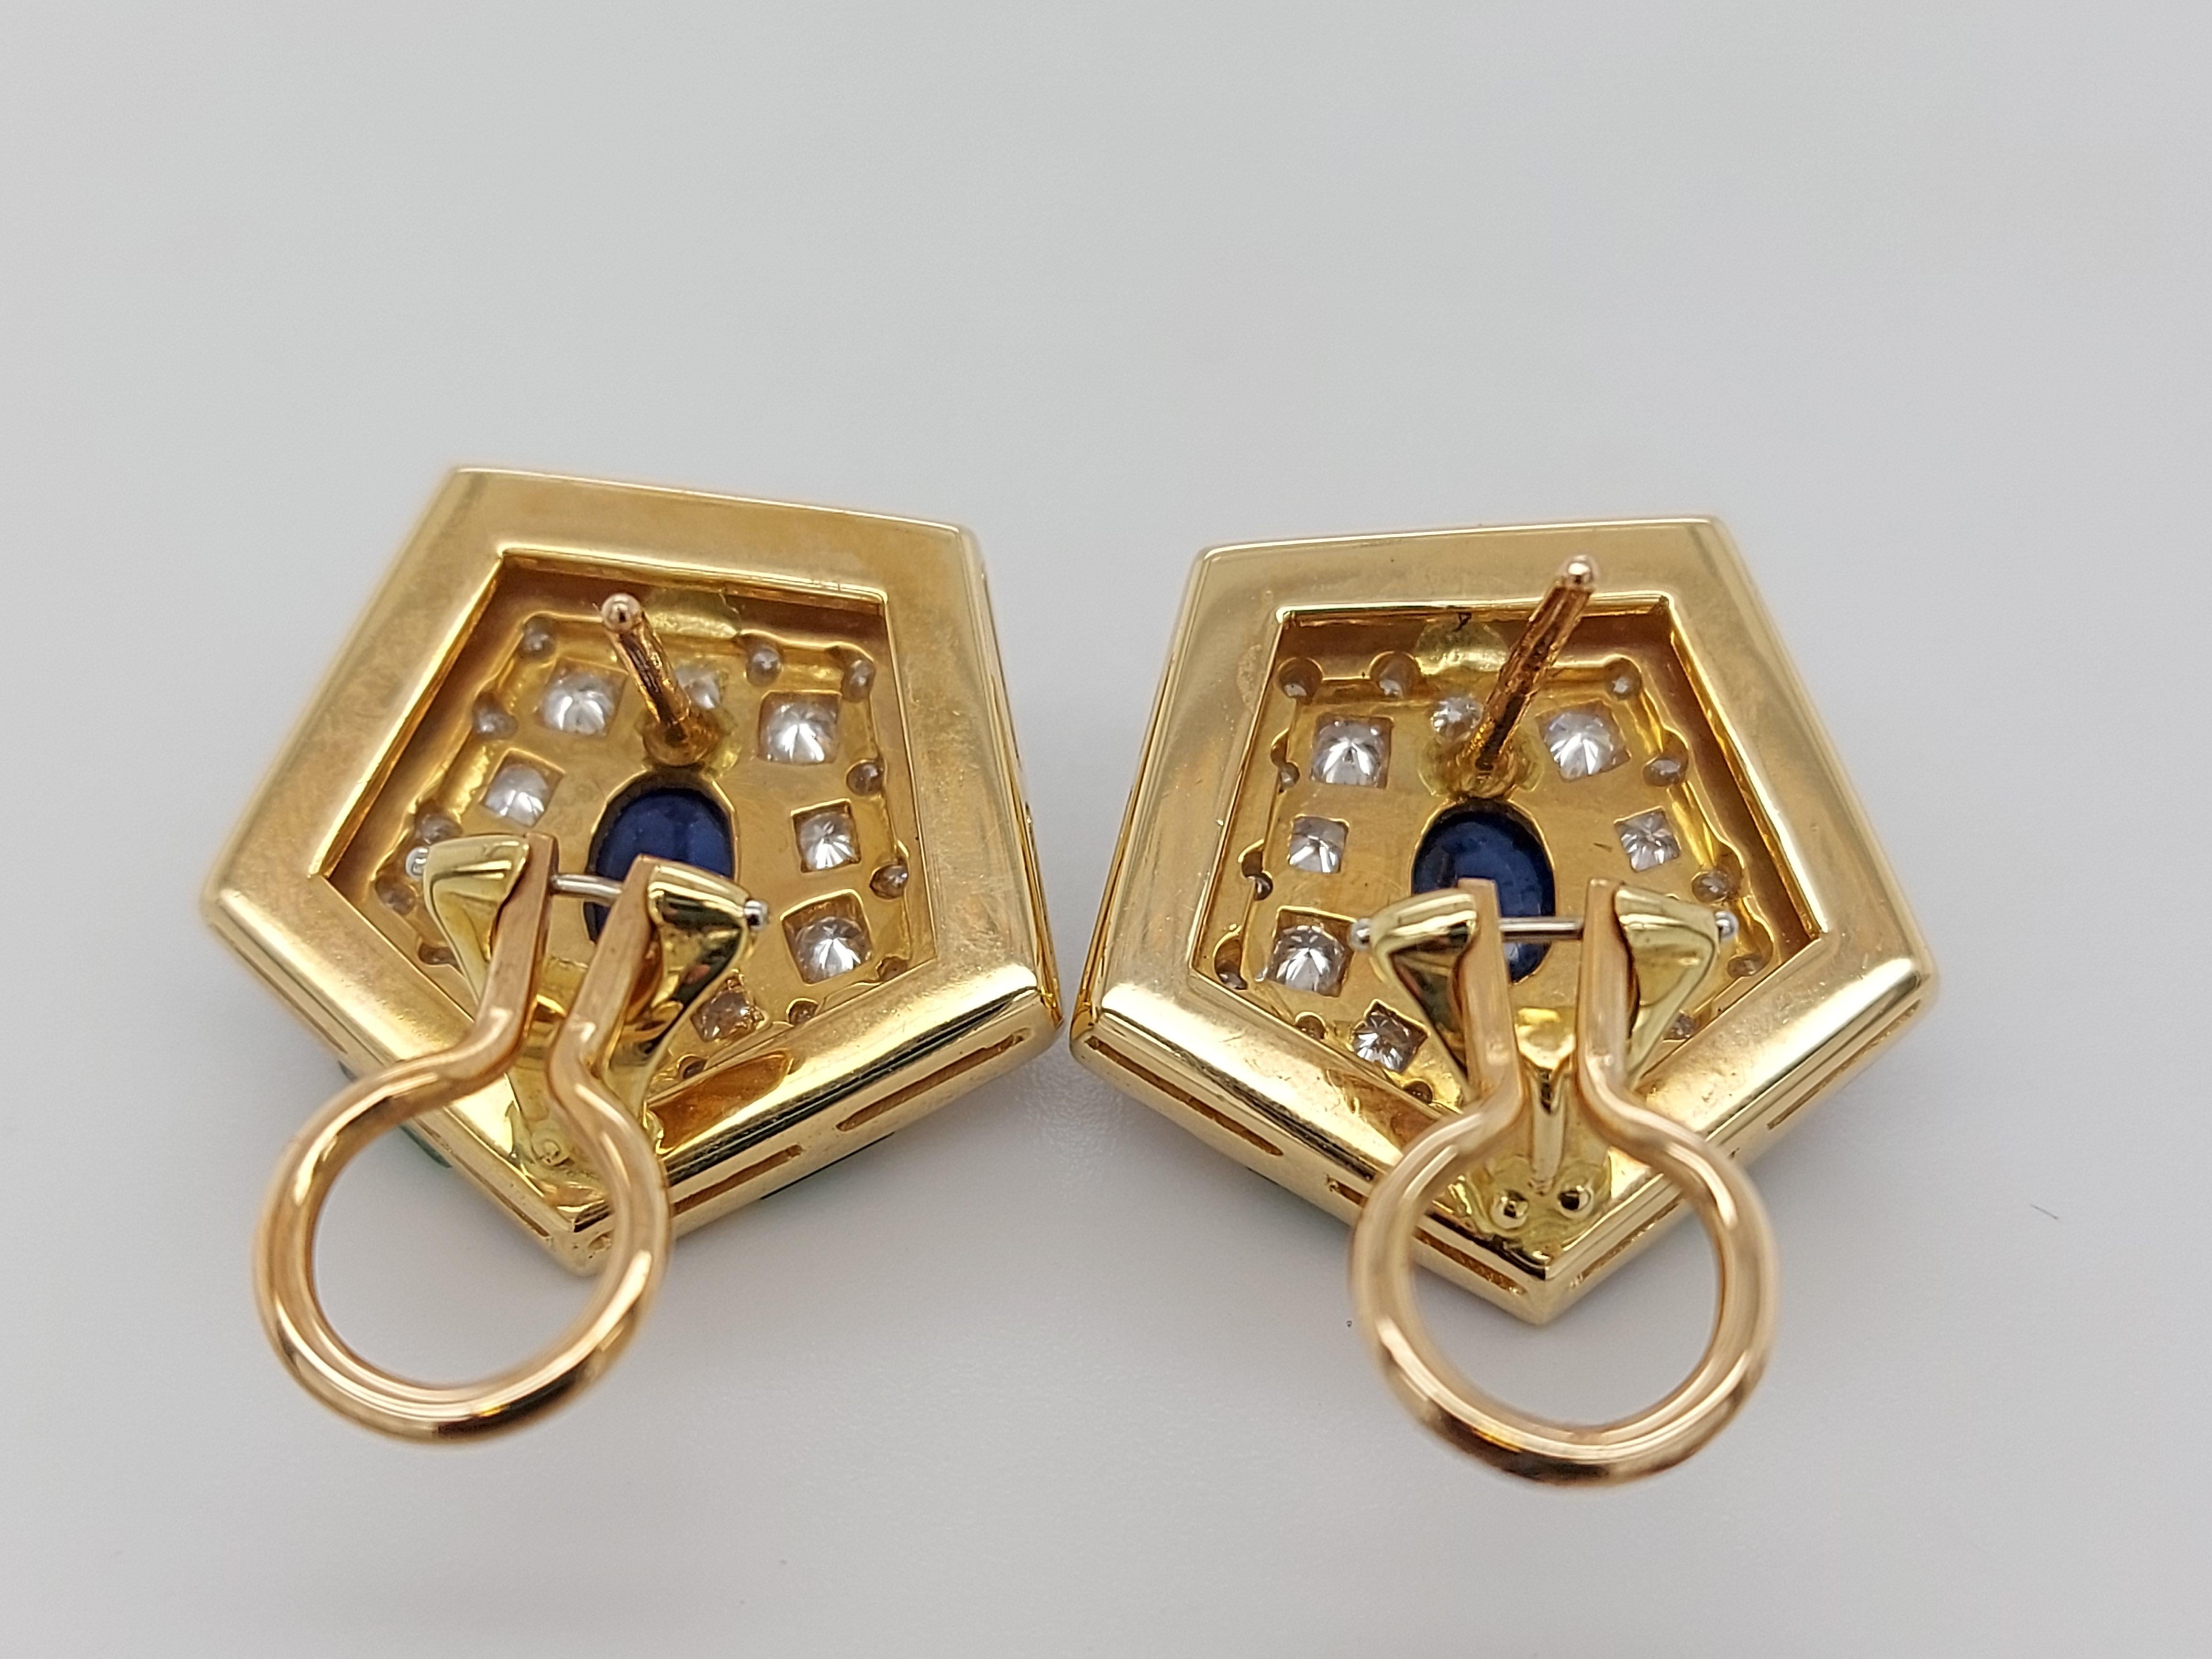 Luxurious Gold Clip-On Earrings With Diamonds, Emerald and Cabochon Sapphire For Sale 8